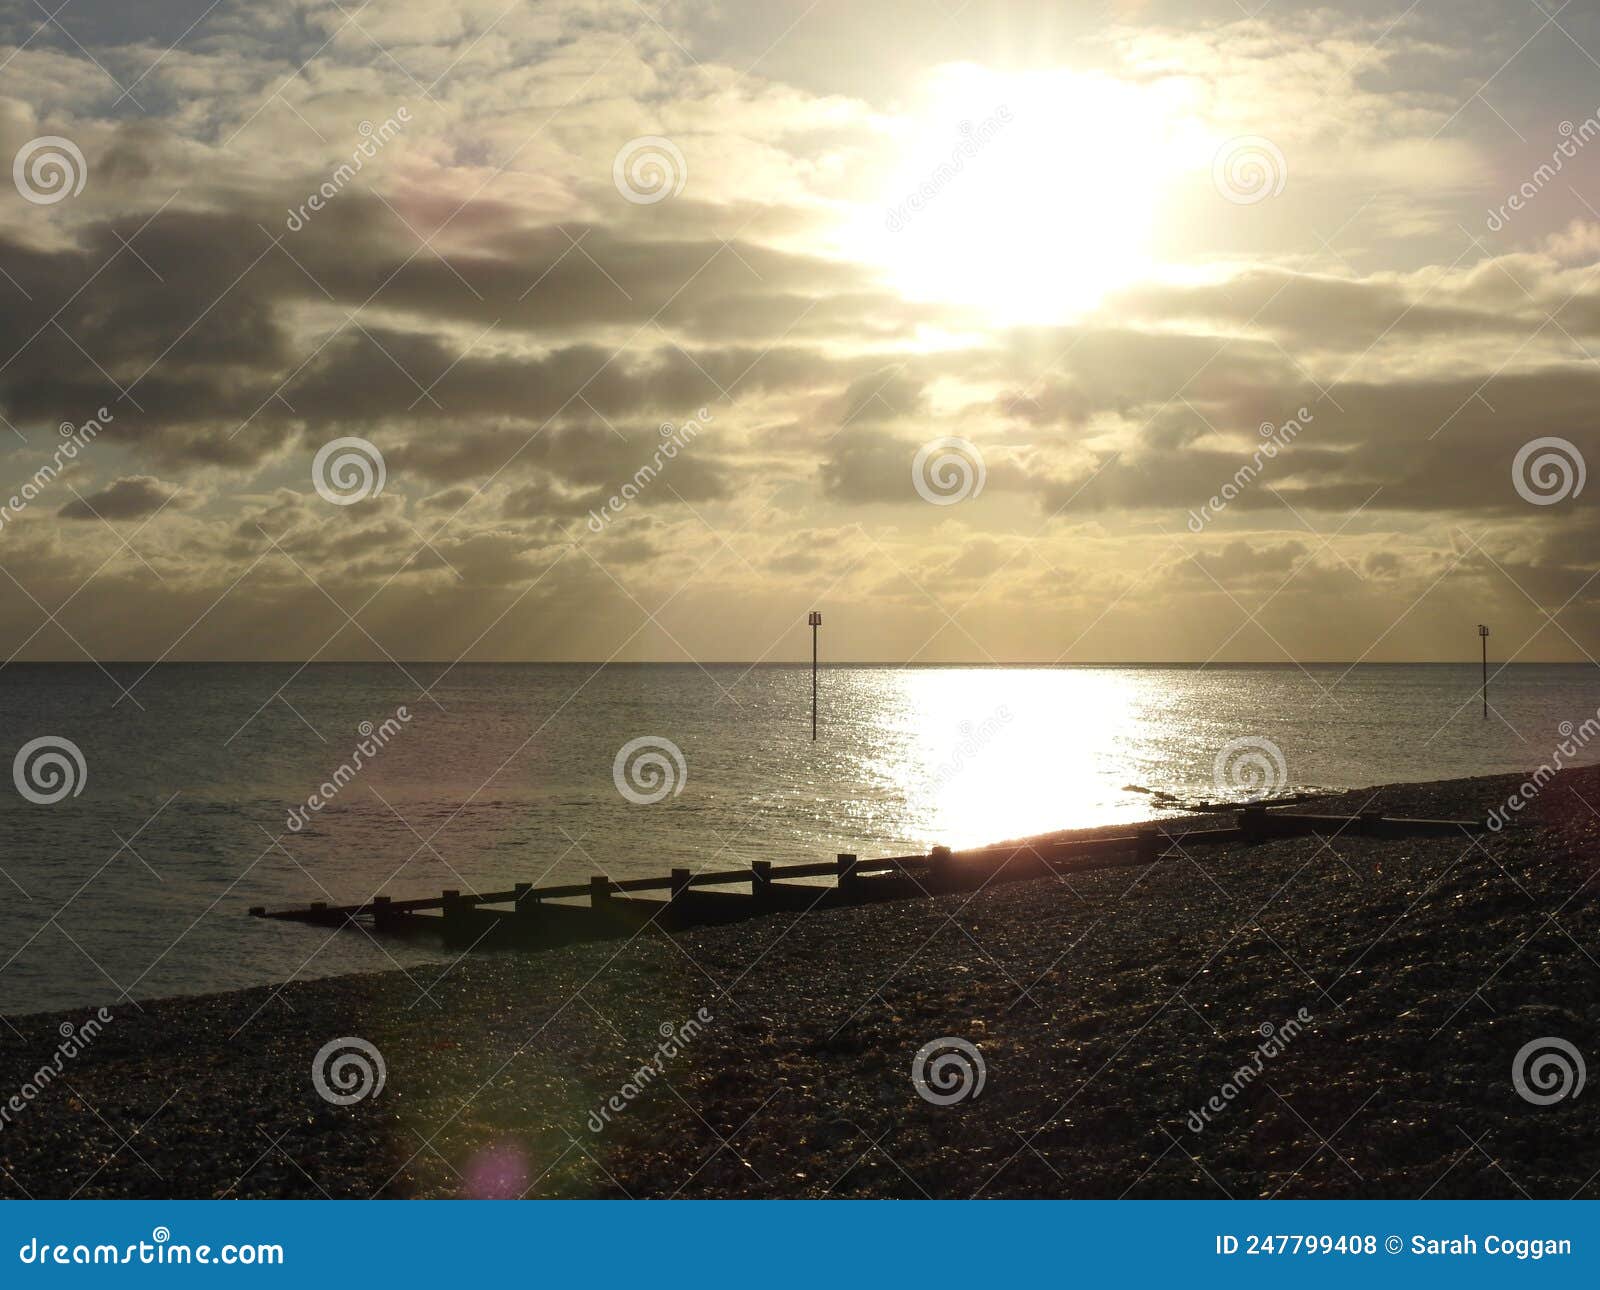 Warm Sunshine on an Afternoon at the Beach Stock Photo - Image of coast ...